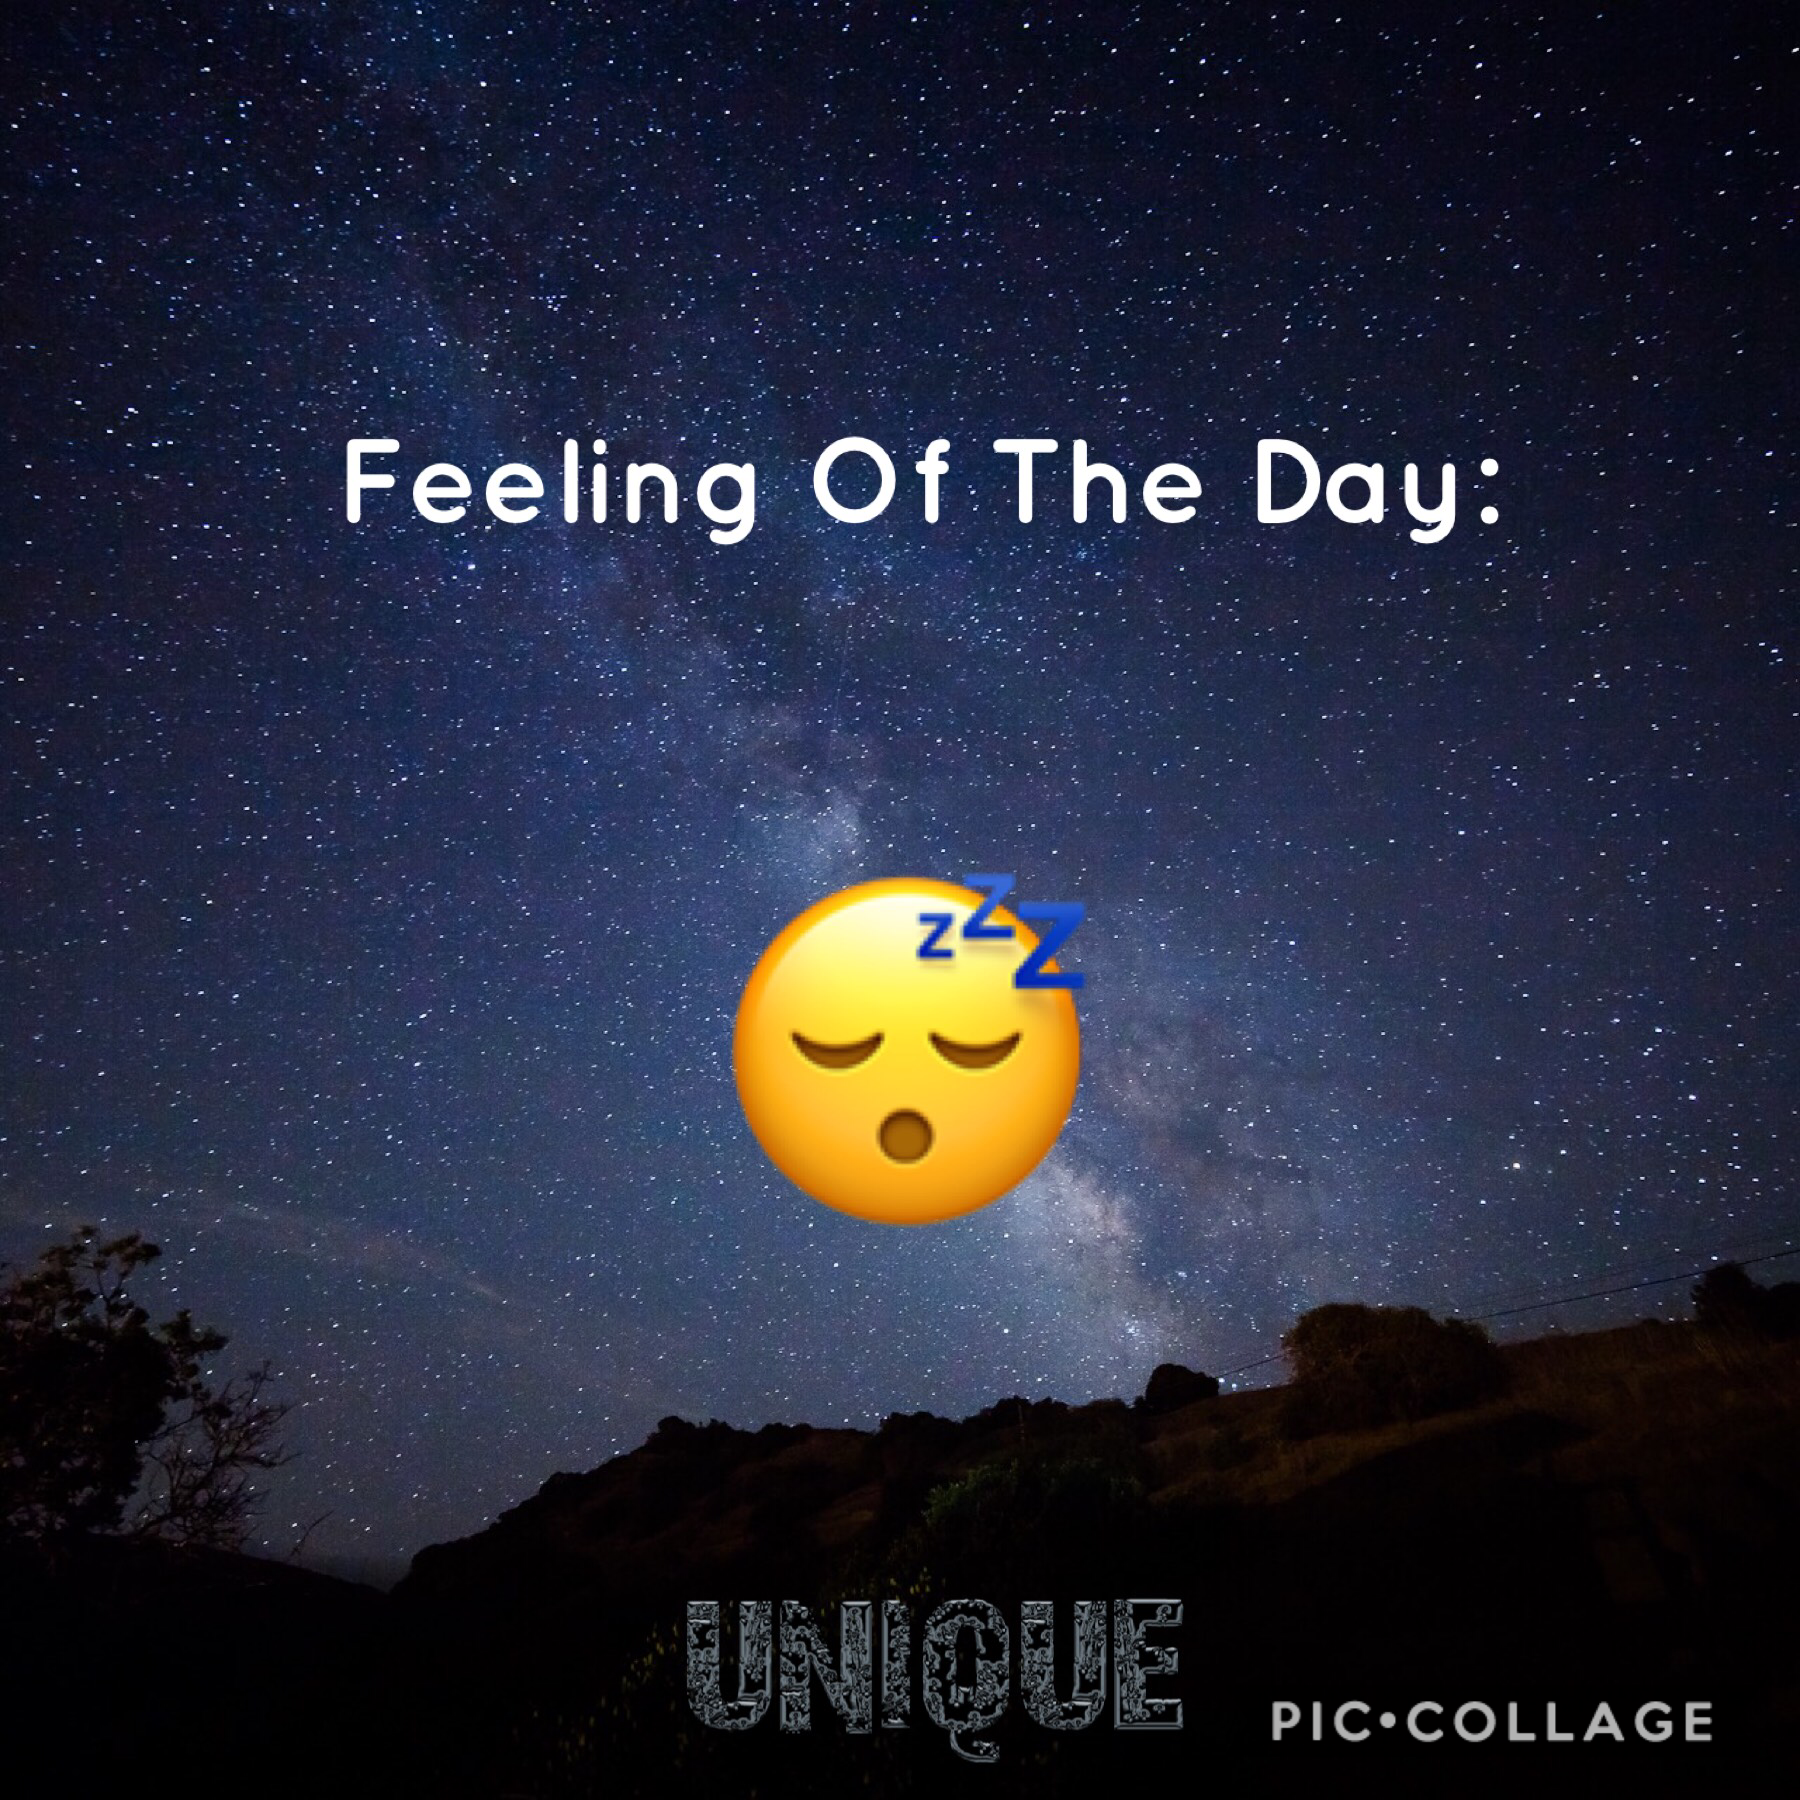 I'm doing his thing I made called 'Feeling Of The Day'. A user called MisMelli does something similar called 'Emoji Of The Day' so I changed it up. Credit to MisMelli